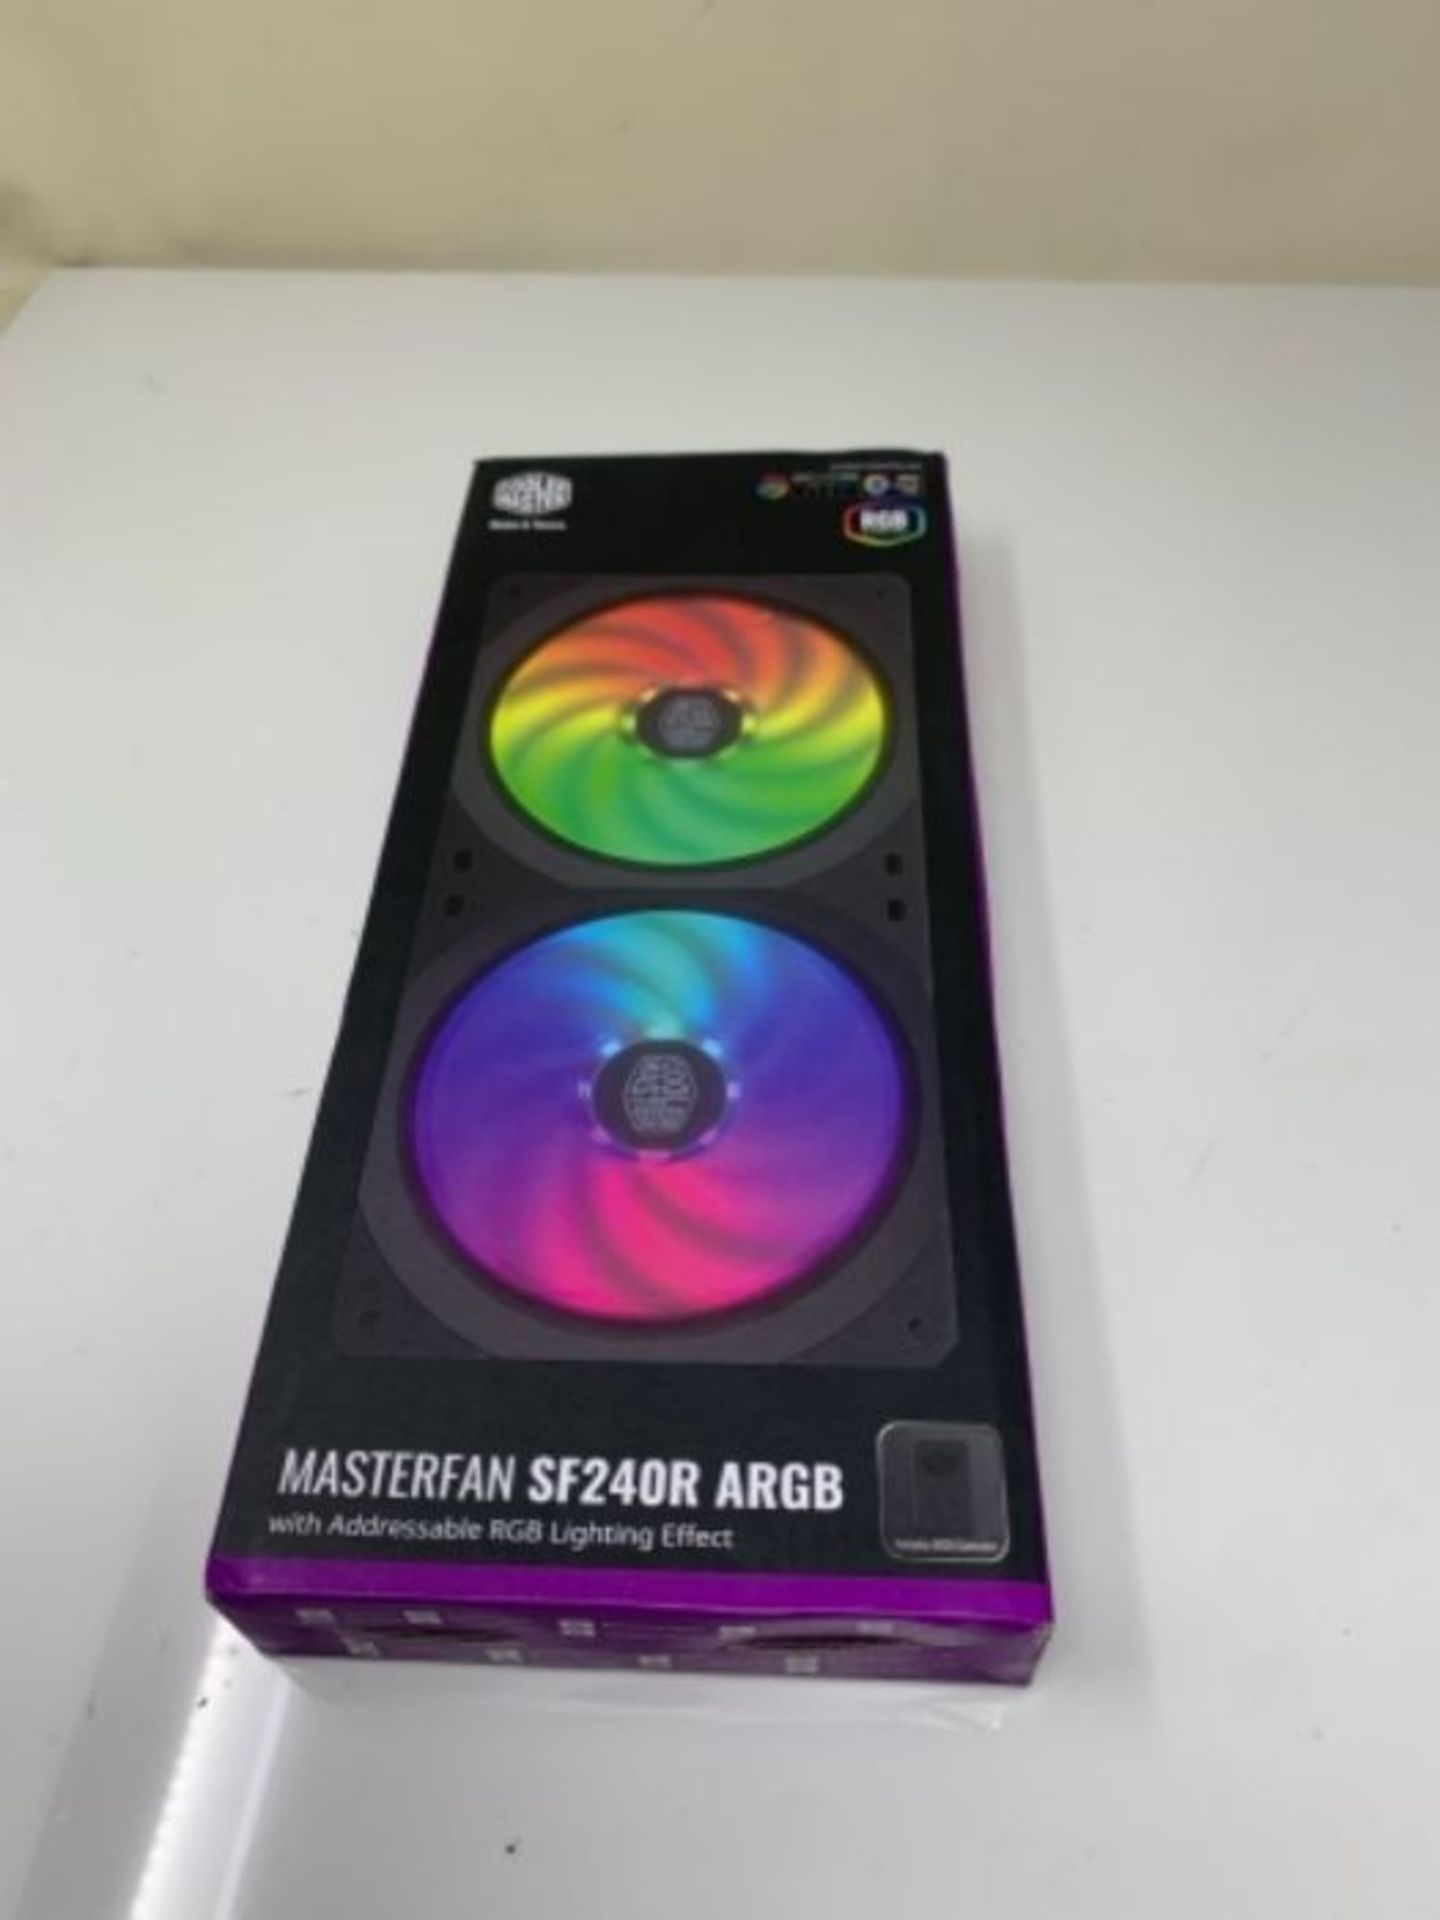 Cooler Master MasterFan SF240R ARGB Case & Cooling Fans -Easy-to-Install Square-Frame - Image 2 of 3